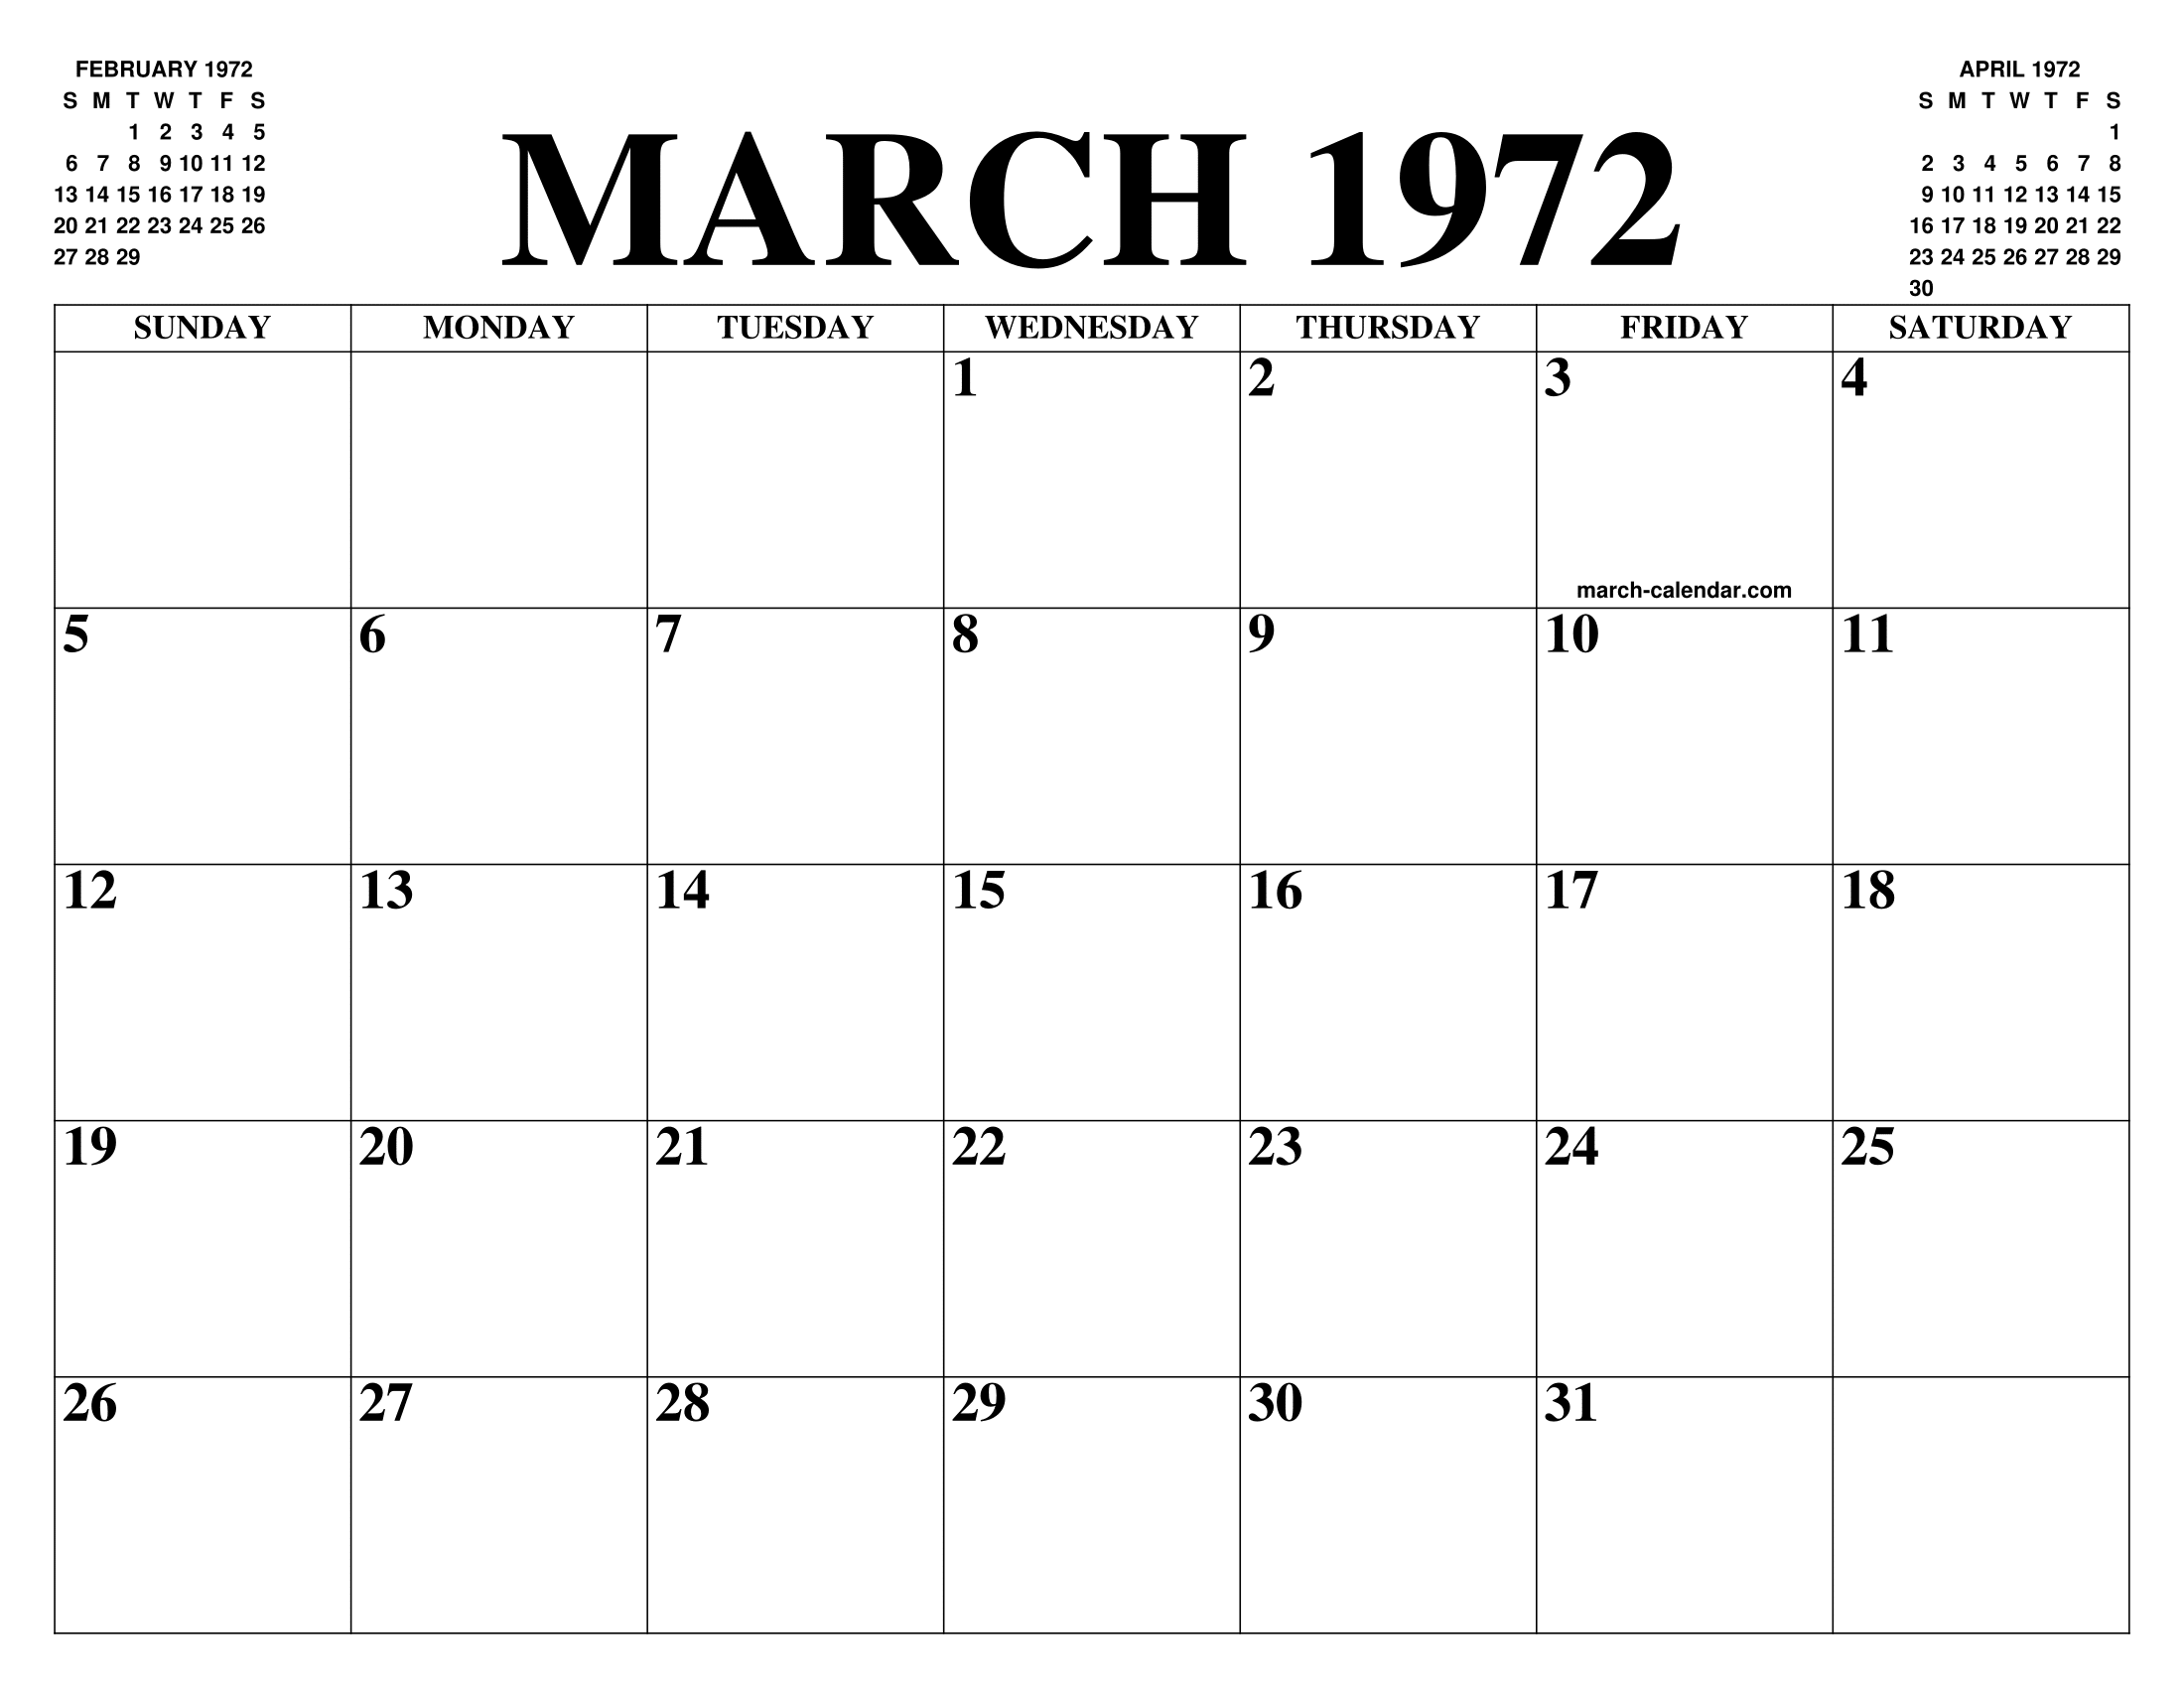 MARCH 1972 CALENDAR OF THE MONTH: FREE PRINTABLE MARCH CALENDAR OF THE